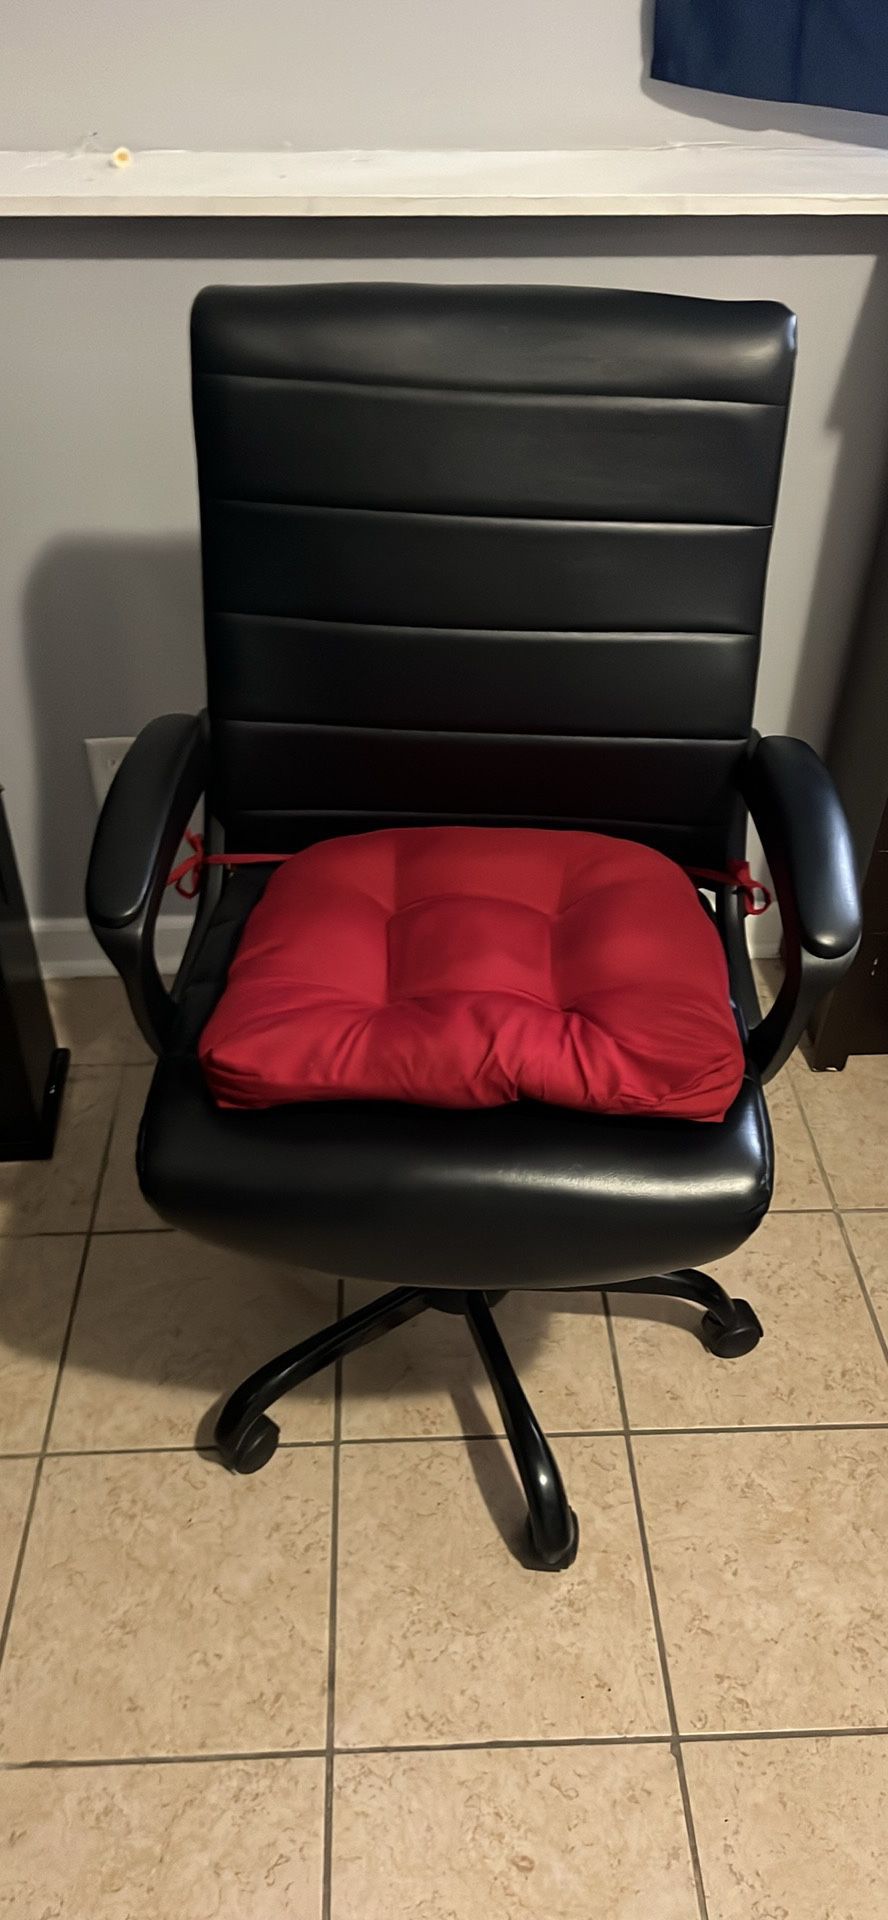 Rolling Chair With Detachable Seat Cushion $30